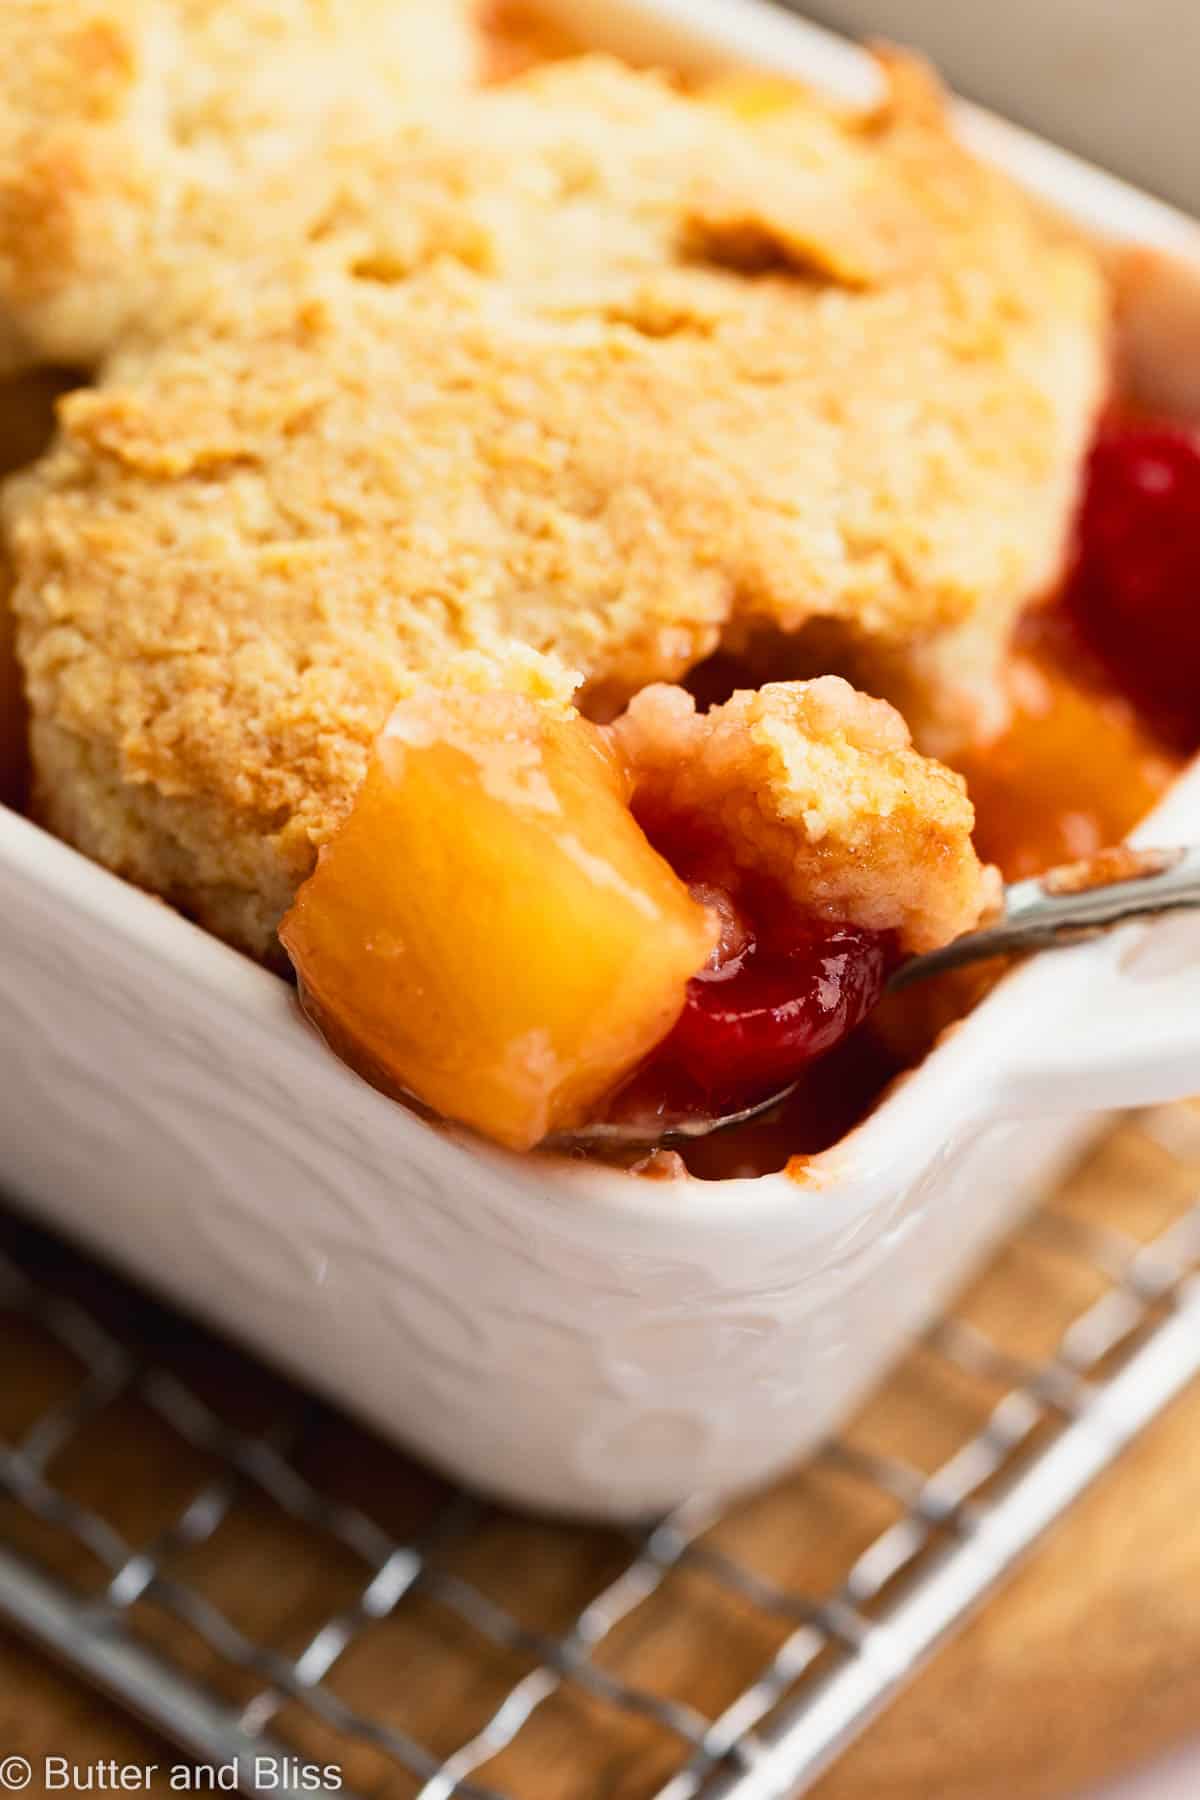 Gooey chunk of pineapple and cherry on a spoon in a pineapple upside down cobbler.